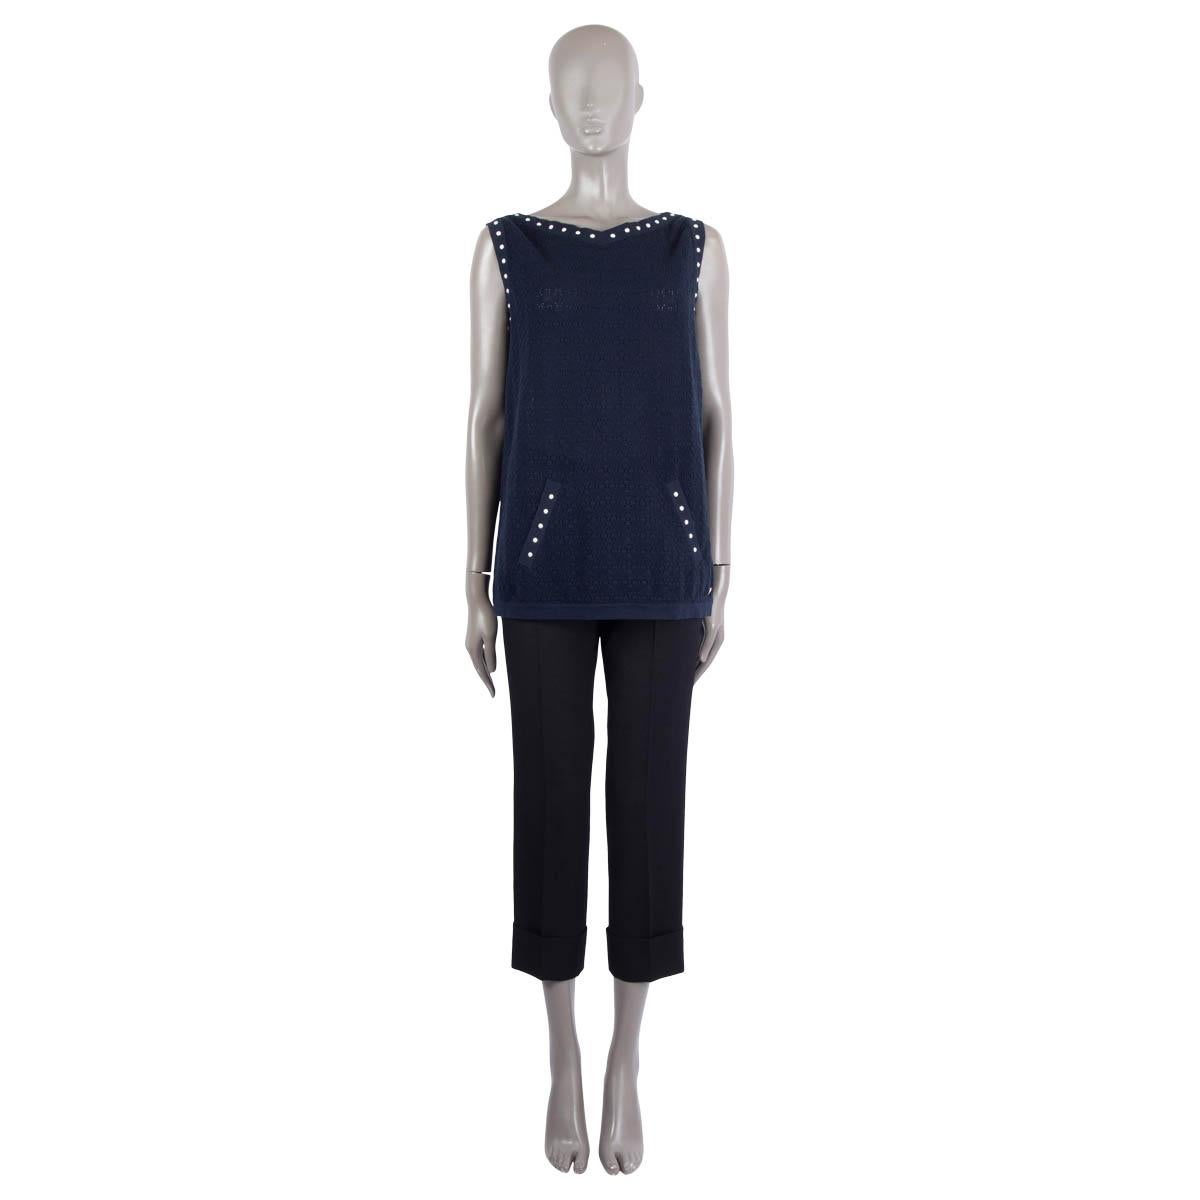 100% authentic Chanel sleeveless oversized crochet knit top in midnight blue cotton (100%). Features pearl embellishments, a front pocket and logo button at the waist. Has been worn and is in excellent condition.

2016